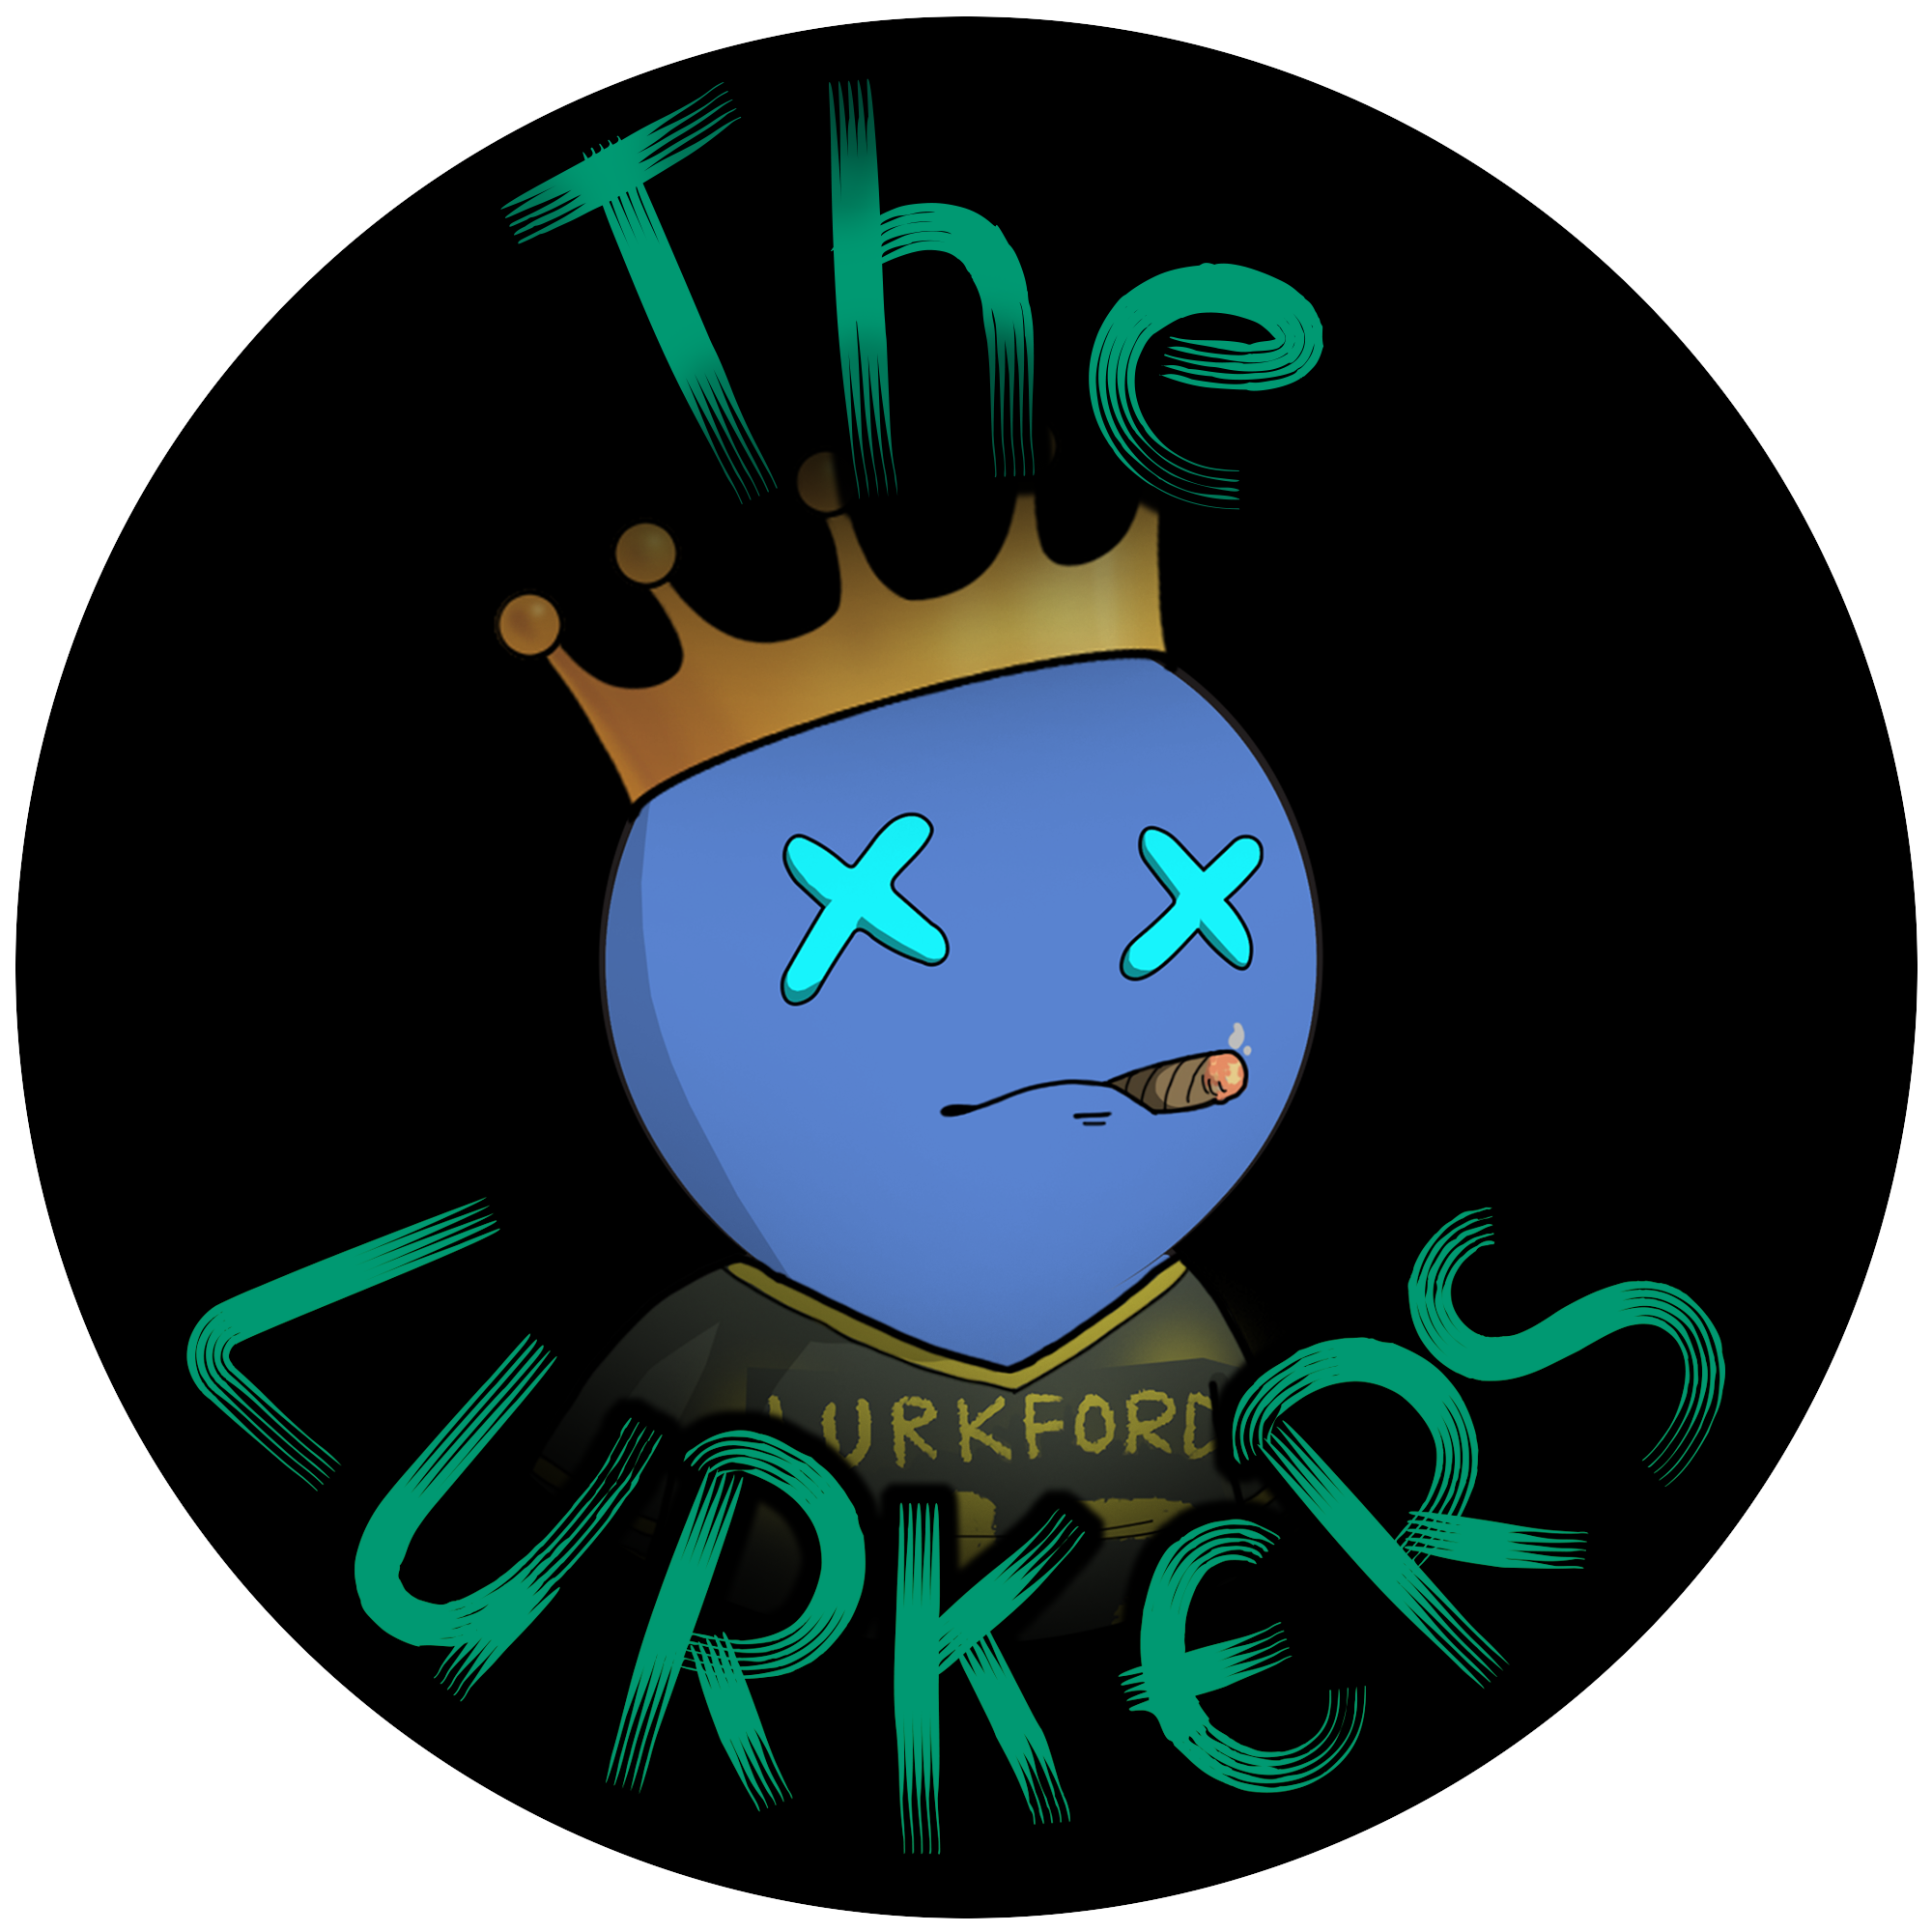 Lurkers